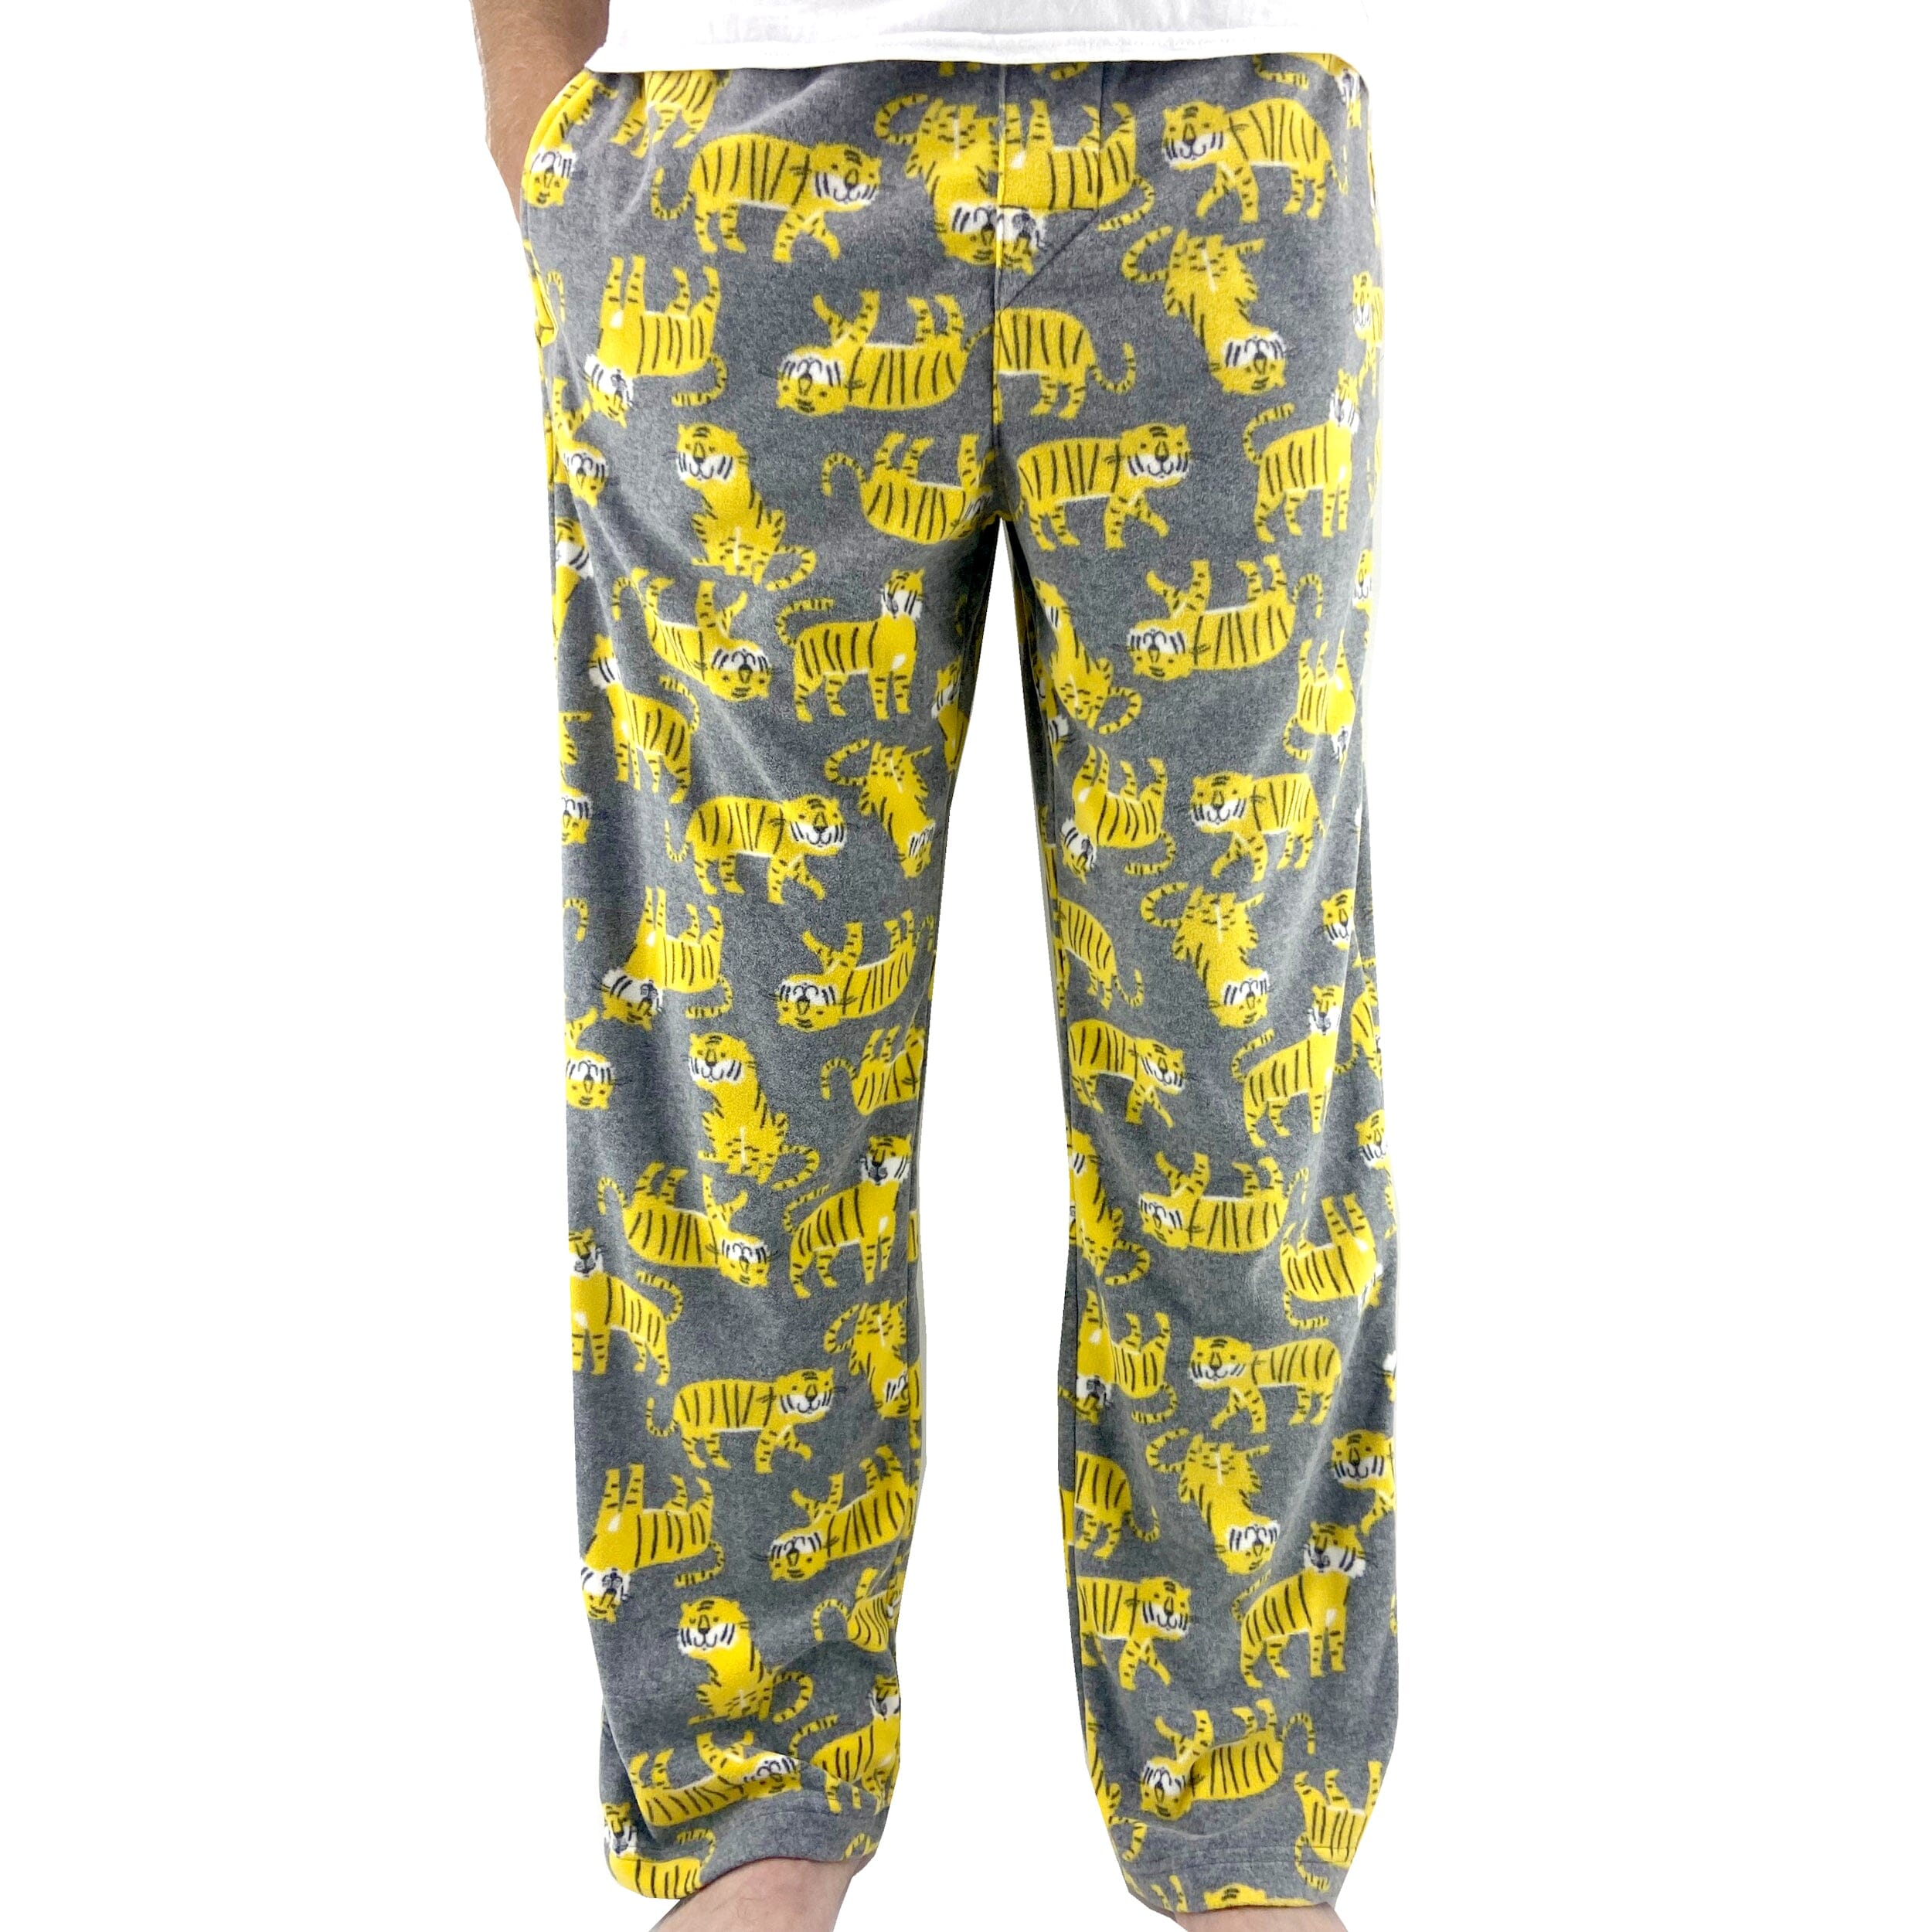 Men's Light Grey Warm Soft Fleece Pajama Bottoms with Tigers All Over